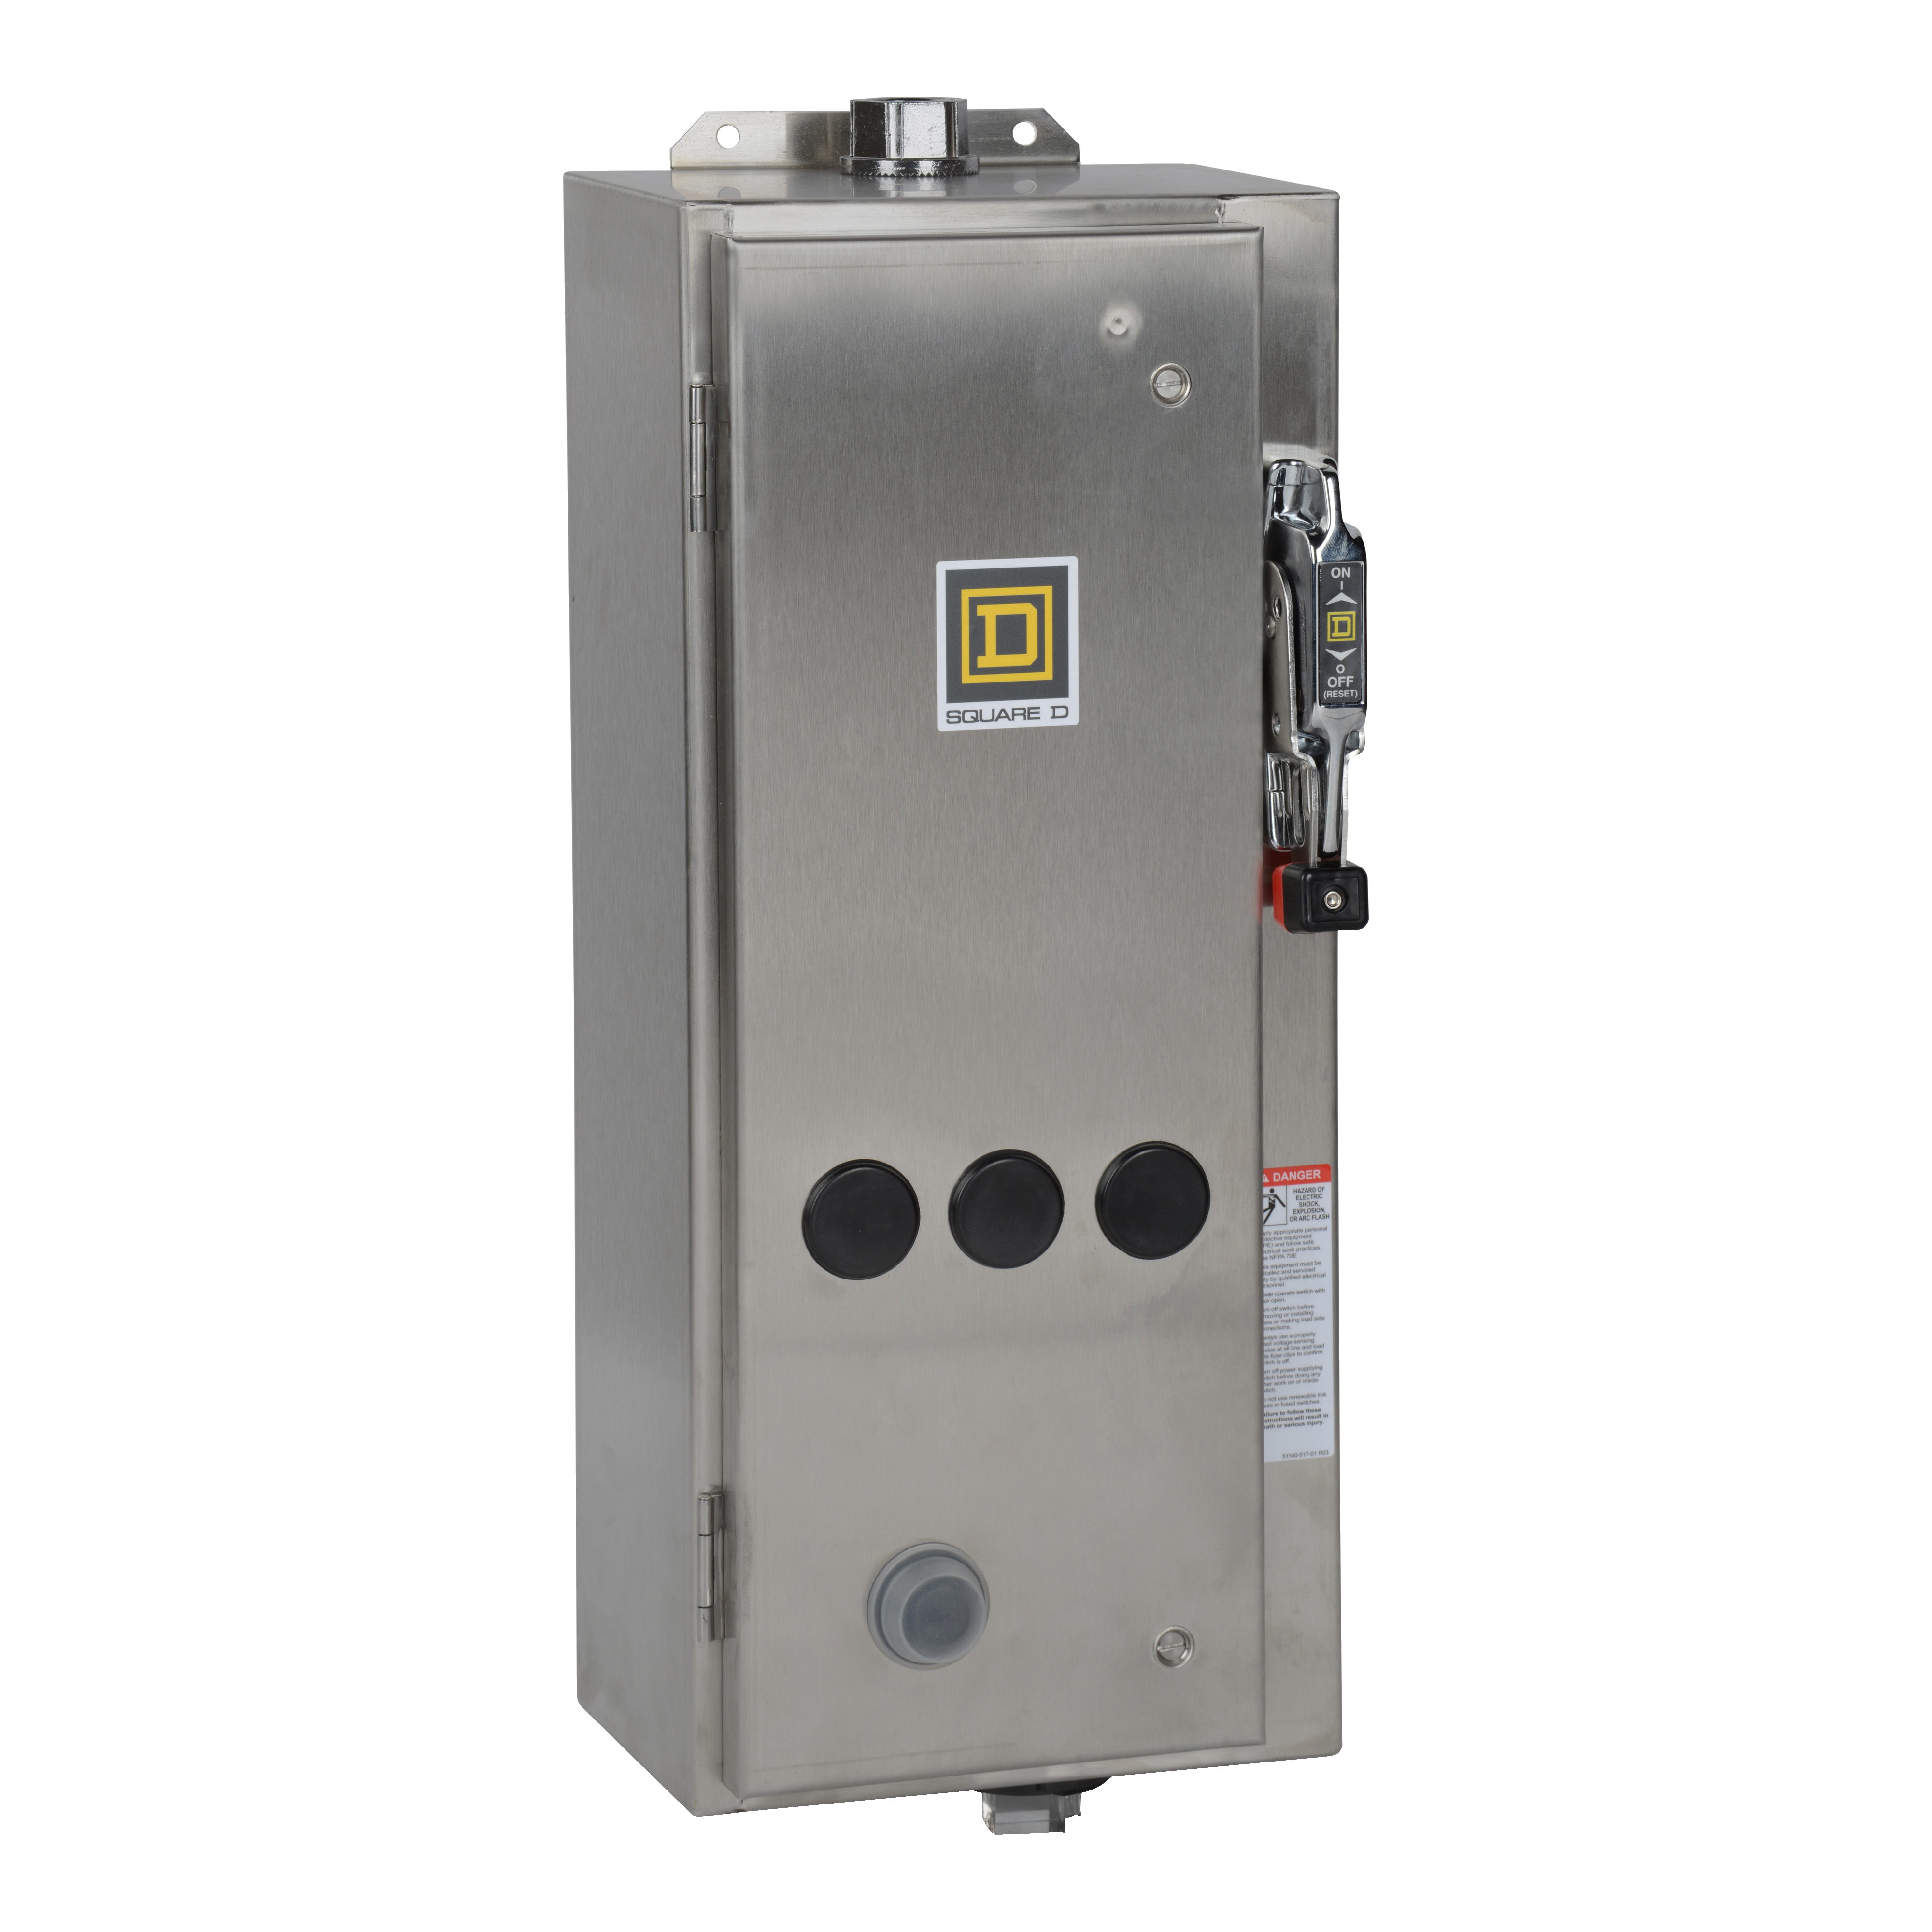 NEMA Combination Starter, Type S, 30A fusible disconnect, Size 0, 18A, 5 HP at 600 VAC polyphase, 24 VAC coil, NEMA 4/4X